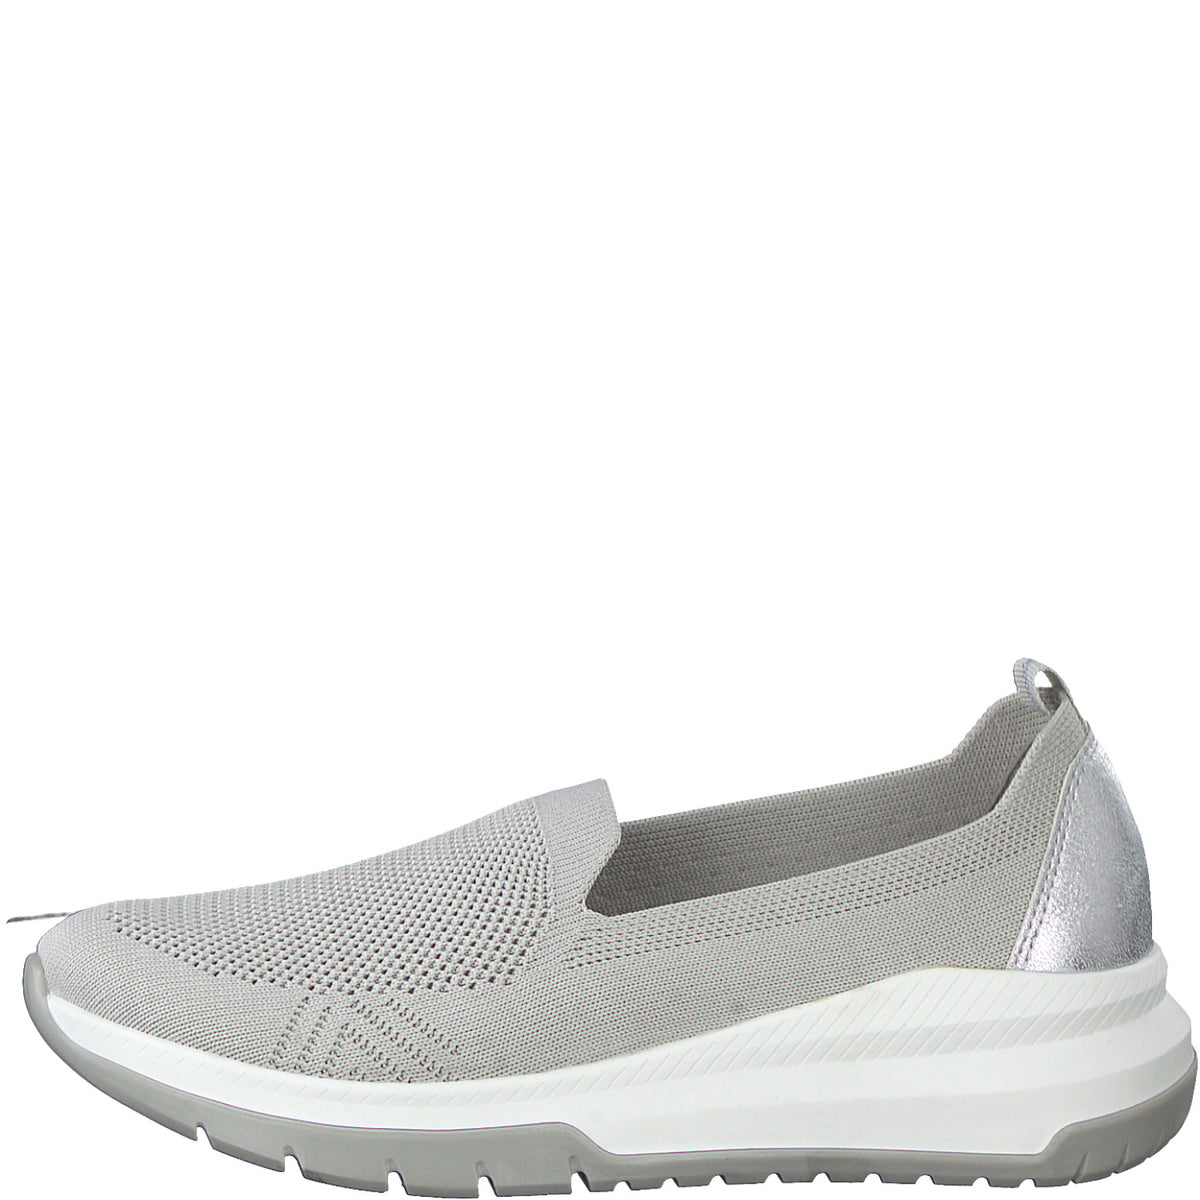 Classic Comfort Slip-On Low Shoes for Summer Days